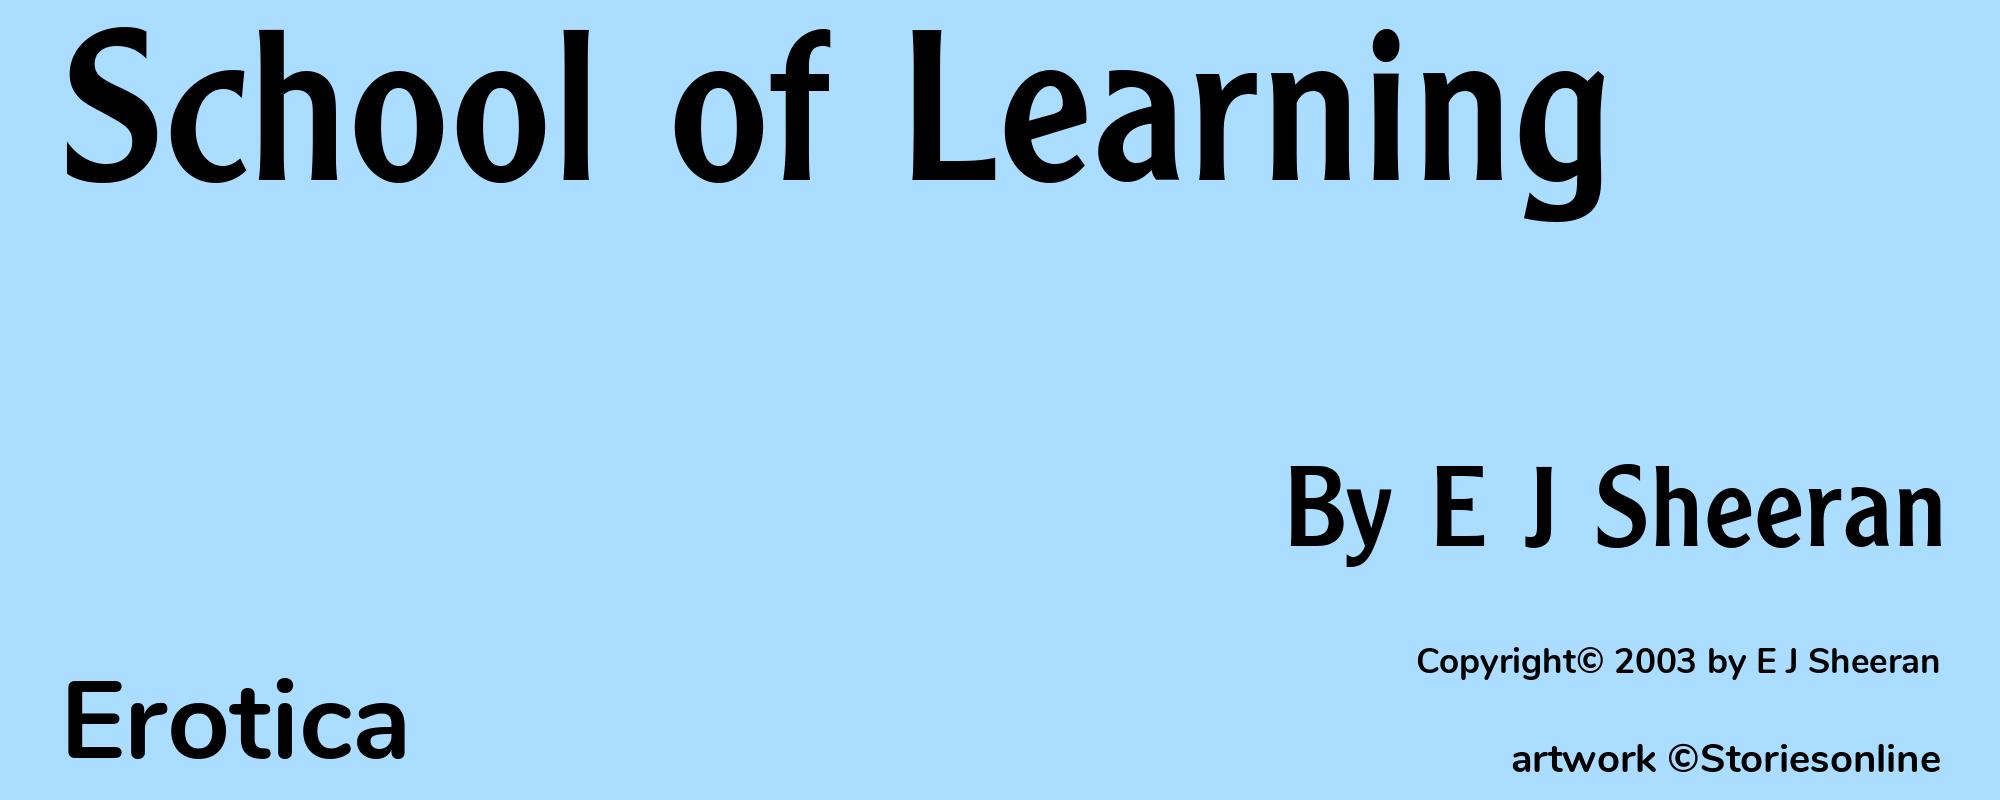 School of Learning - Cover